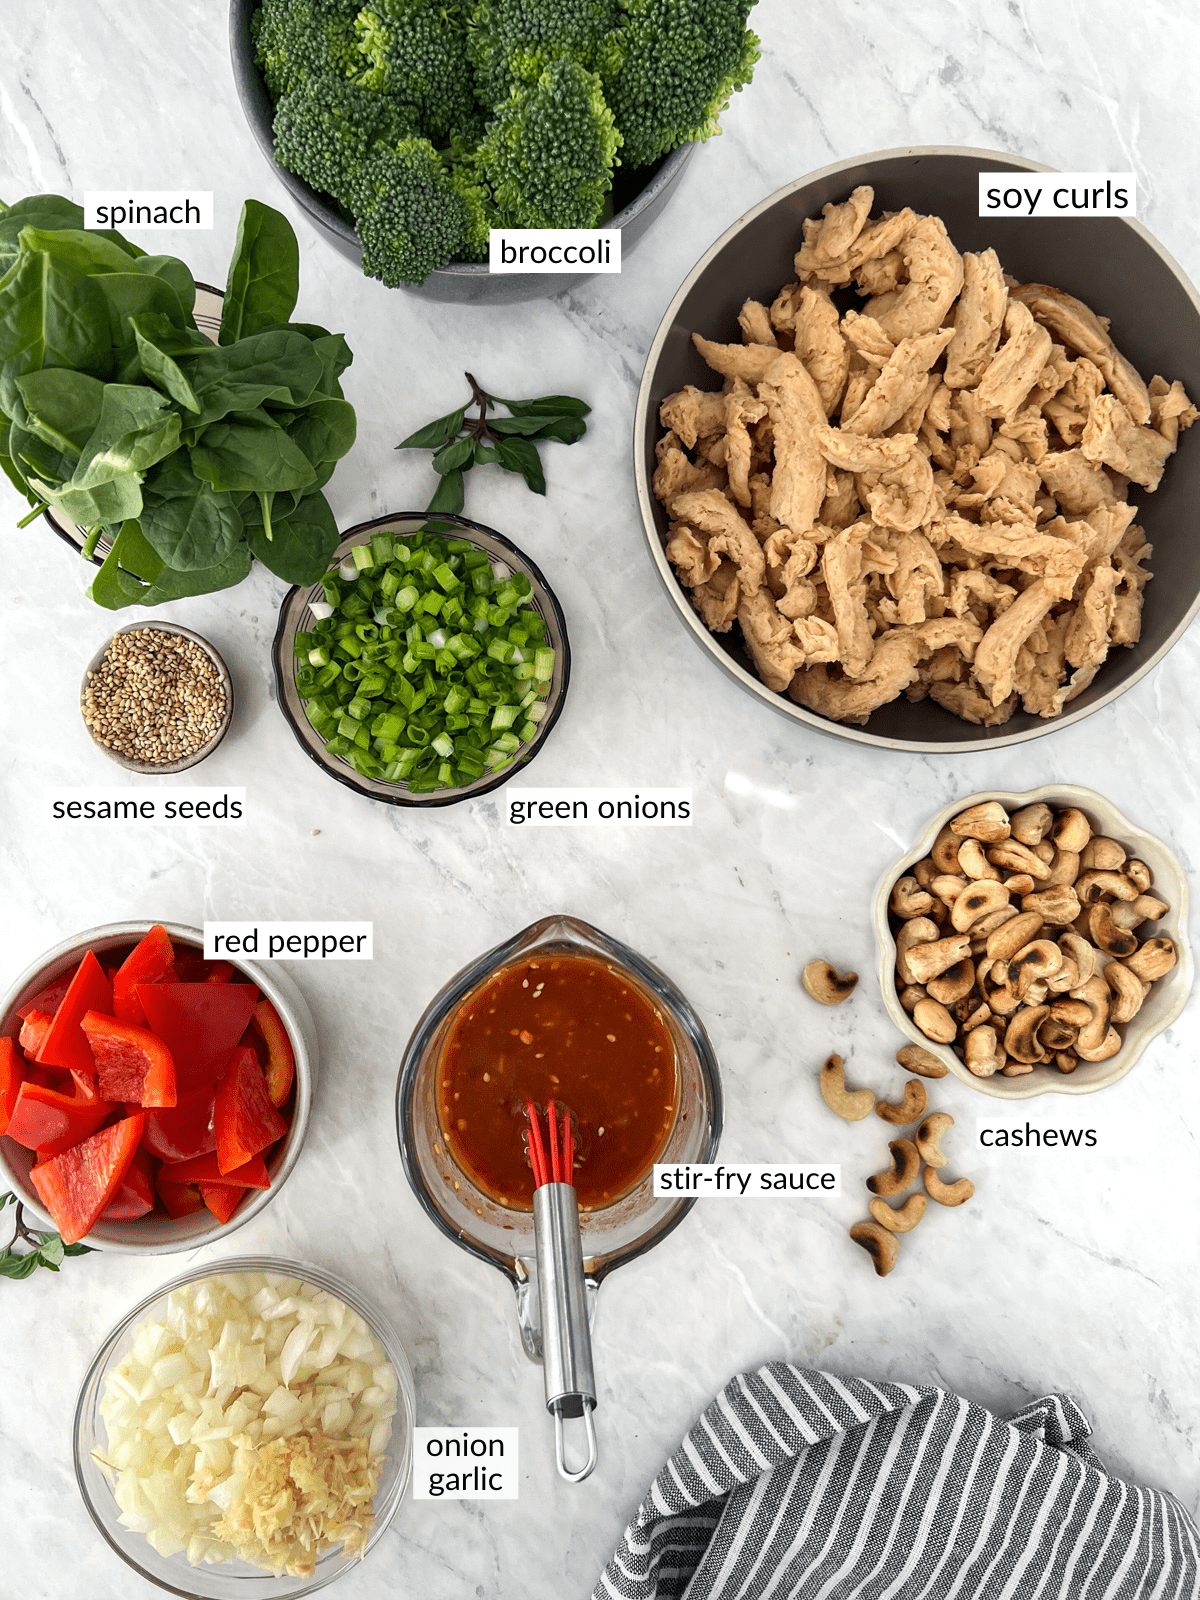 Ingredients for vegan chicken stir fry in bowls on a counter.